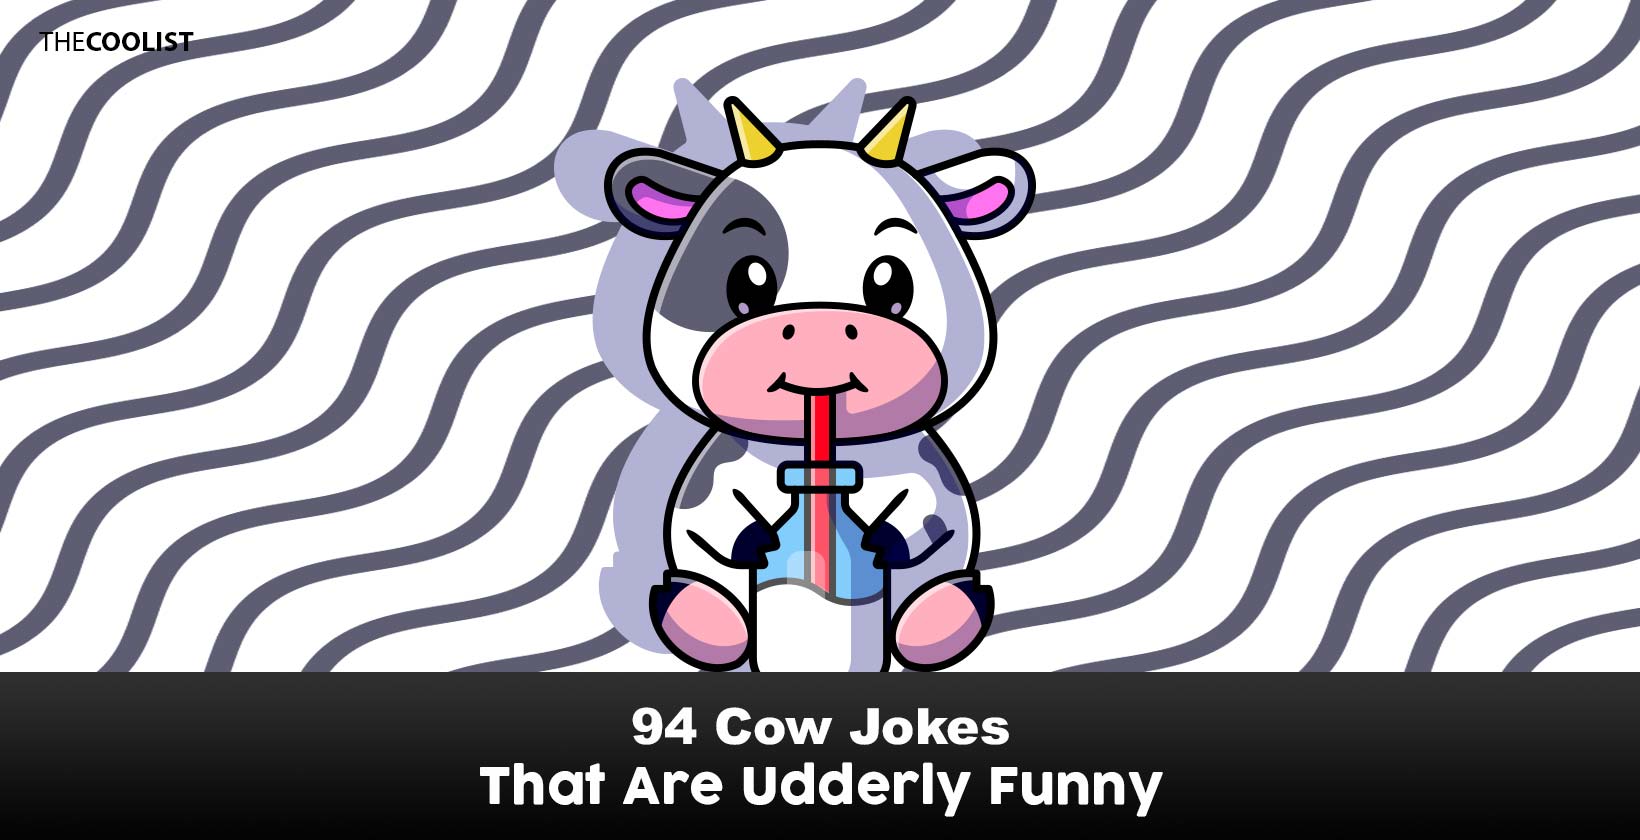 94 Cow Jokes That Are Udderly Funny